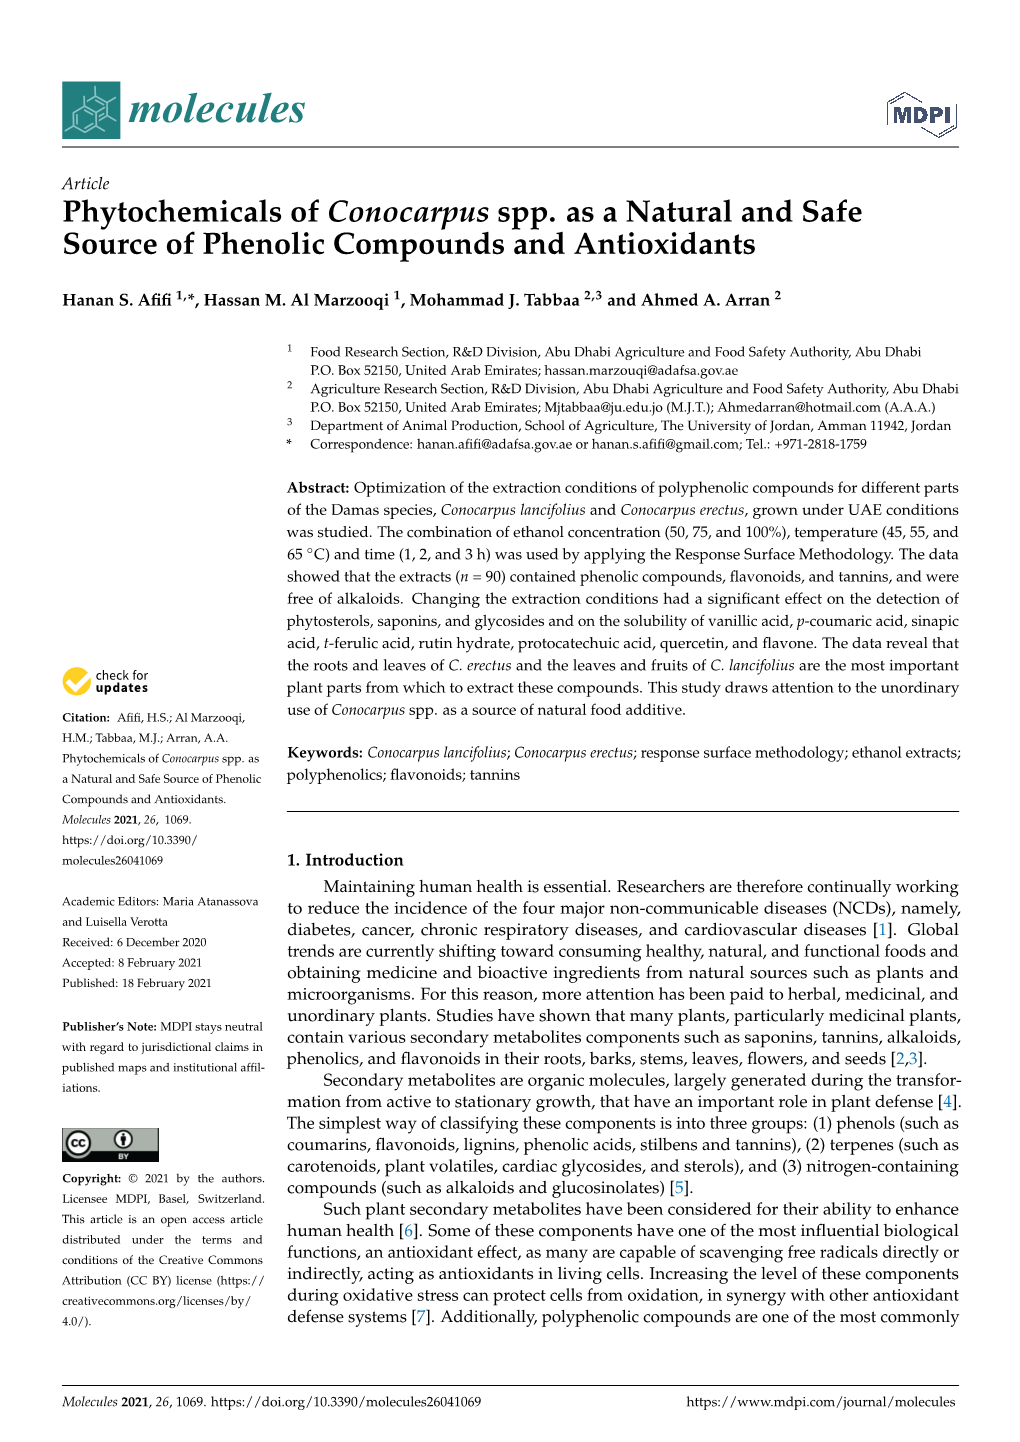 Phytochemicals of Conocarpus Spp. As a Natural and Safe Source of Phenolic Compounds and Antioxidants